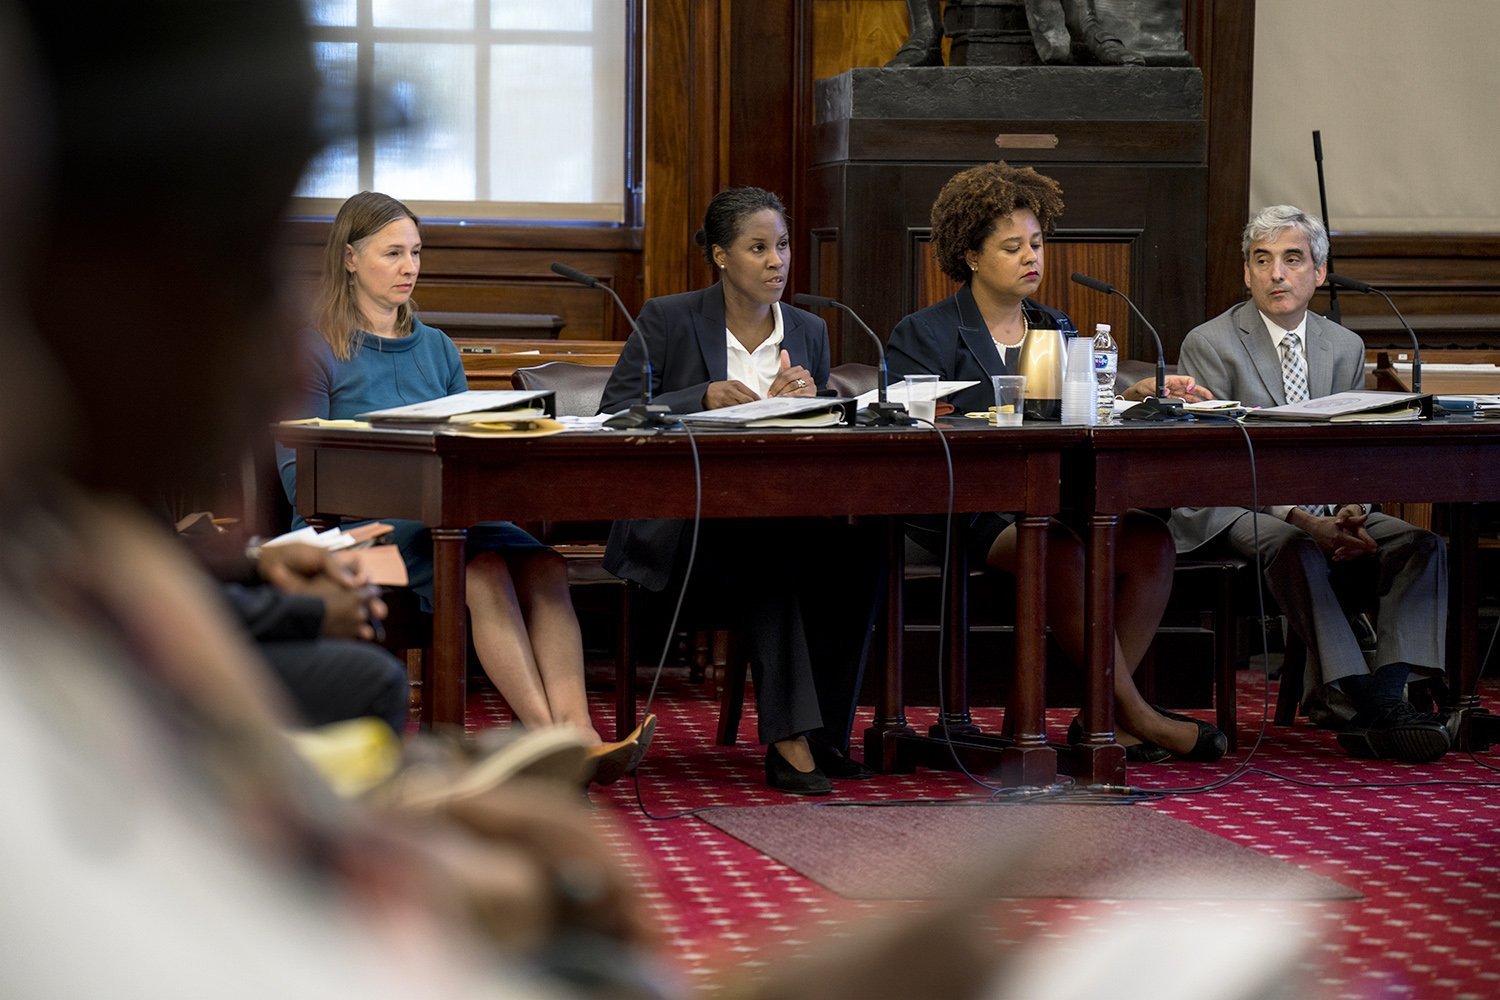 Louise Carroll, Commissioner of HPD (second from left), and her team defends the Third Party Transfer as a successful program helping the minority community throughout the city, while admitting its need for "update." (Photo by Tsubasa Berg)